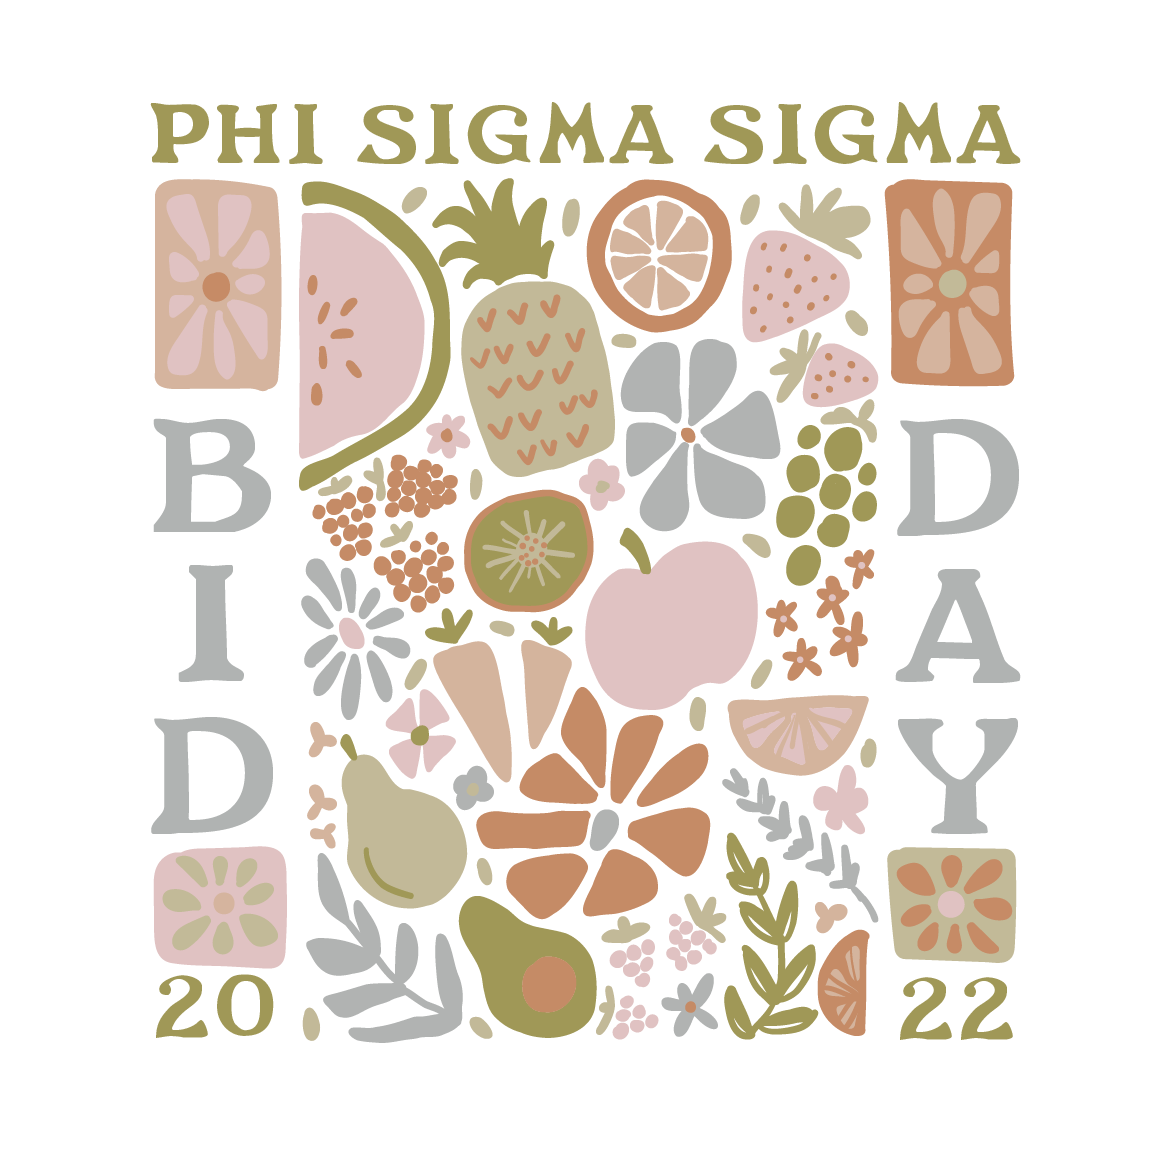 Phi Sigma Sigma Fruit Flowers colorful Bid Day.png